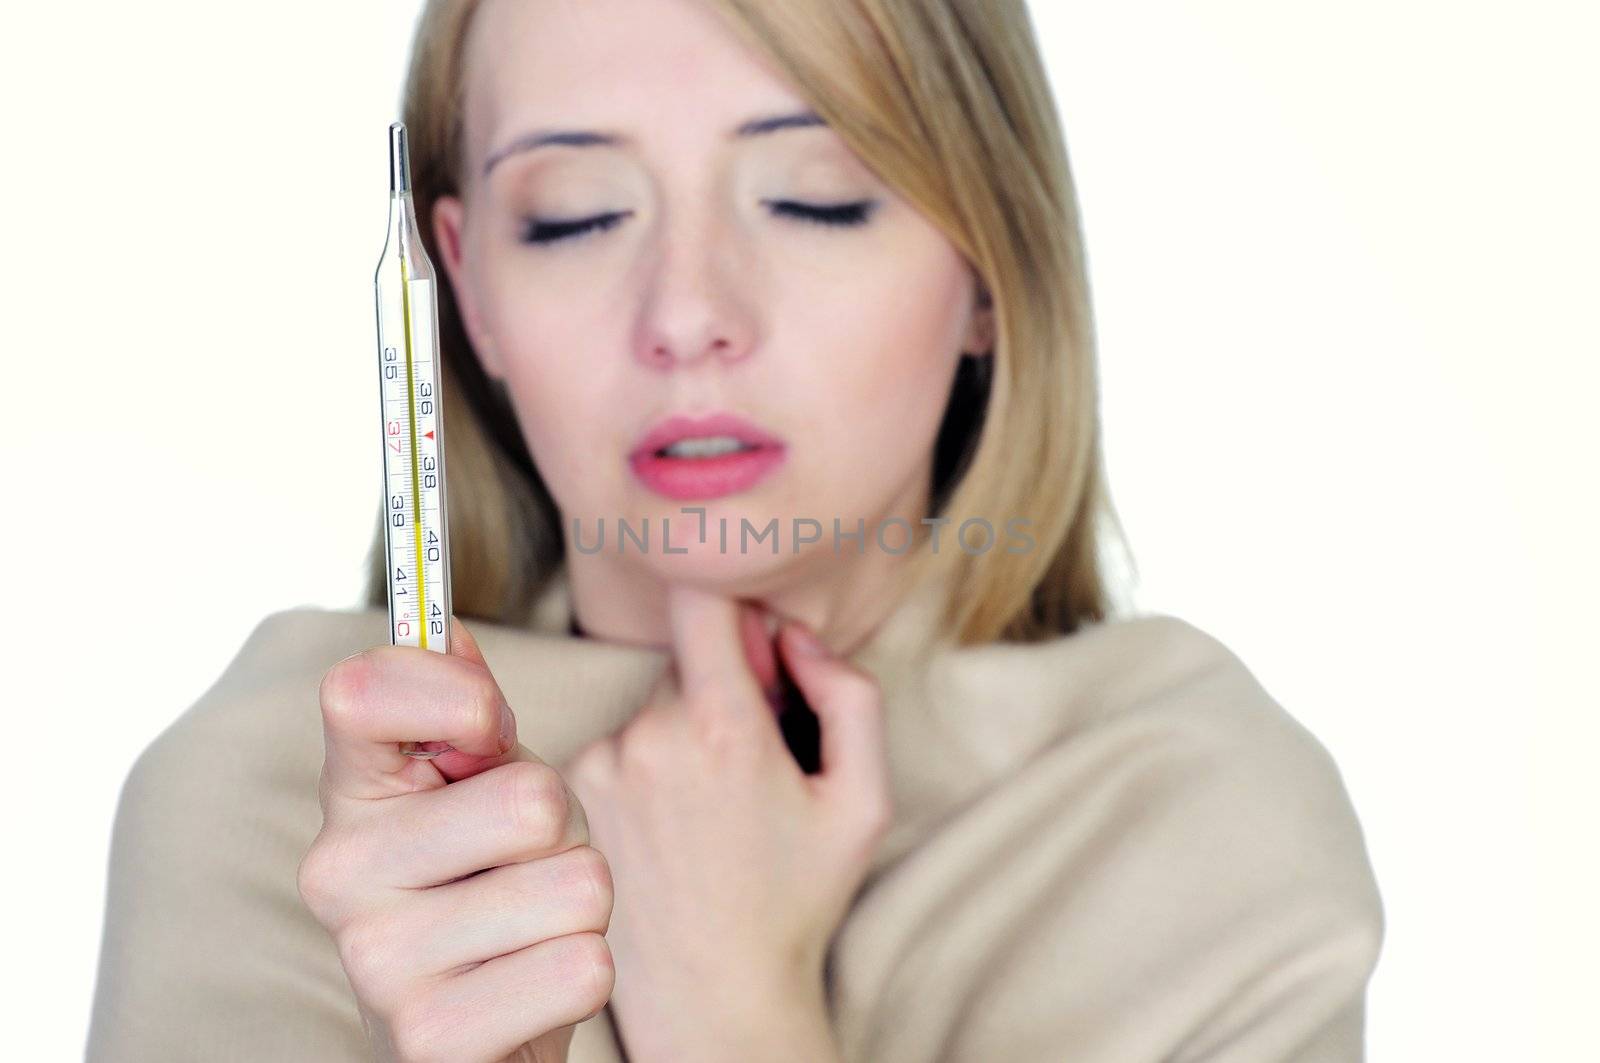 Woman with high temperature holding a thermometer isolated on white.







Woman with high temperature holding a thermometer